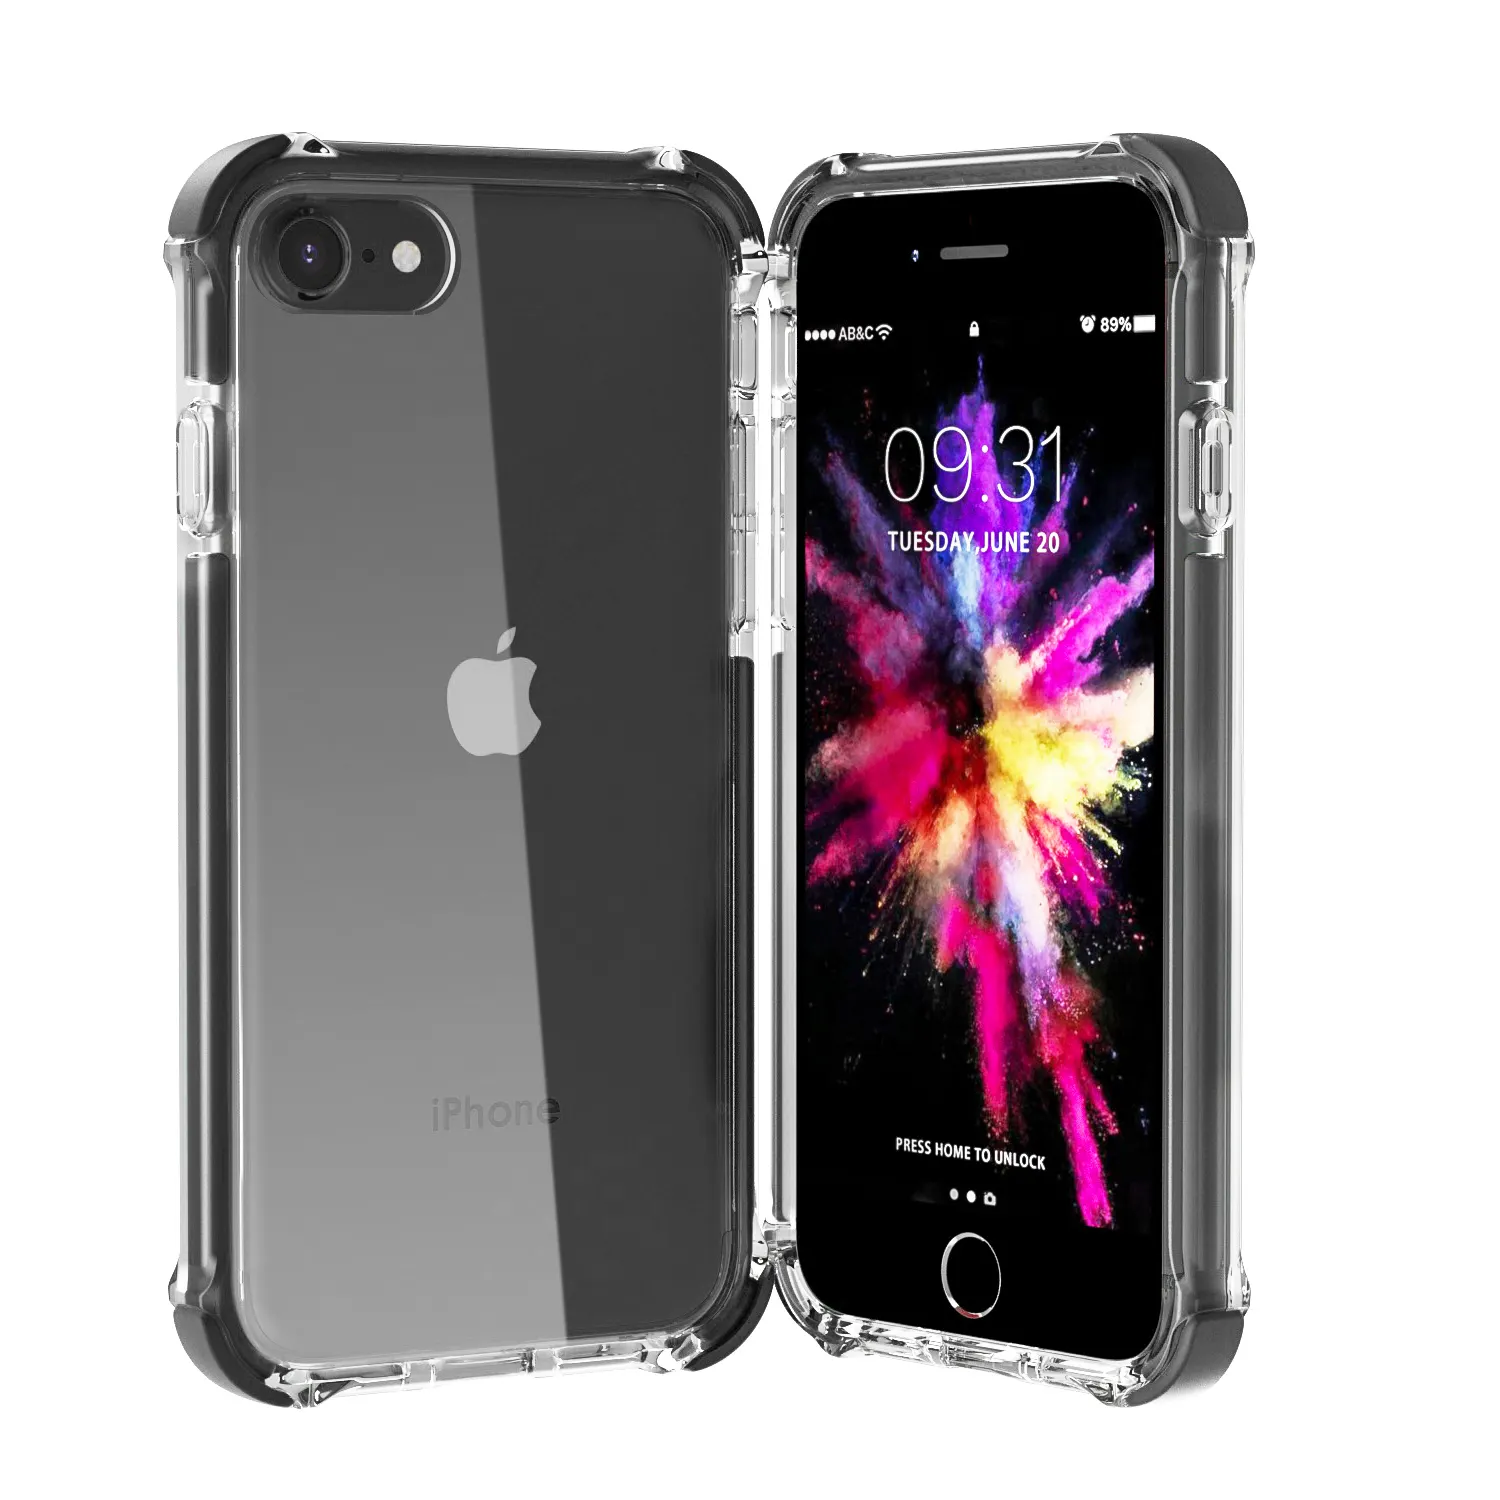 3 in 1 hybrid plastic black SE3 phone case and accessories for iPhone SE 2022 case cover shell